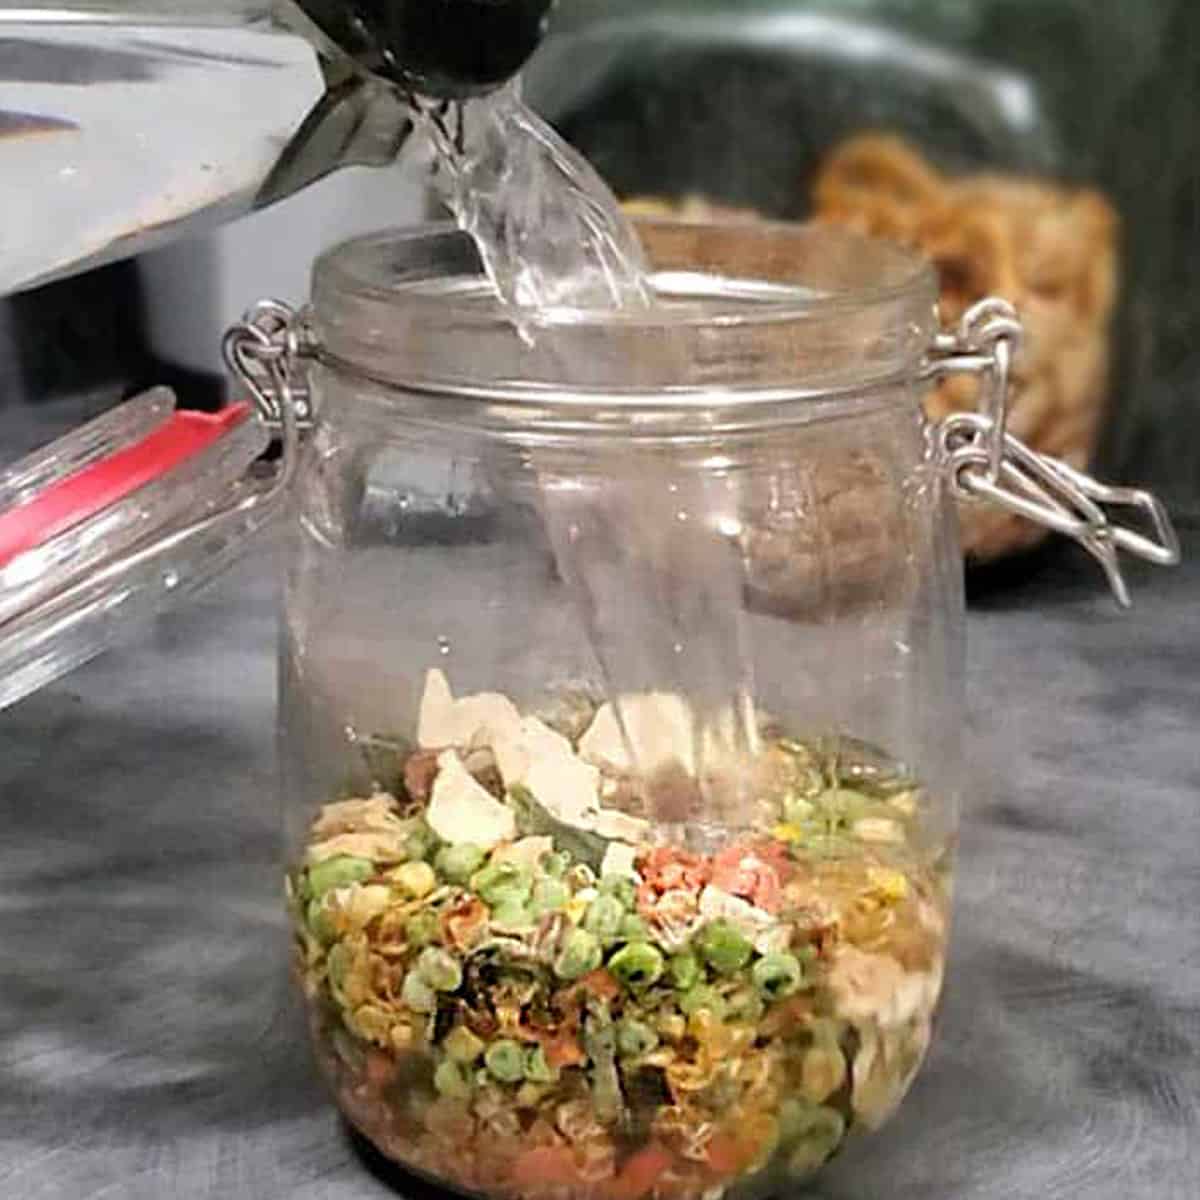 A guide to freeze dried food: 4 easy methods to preserve your